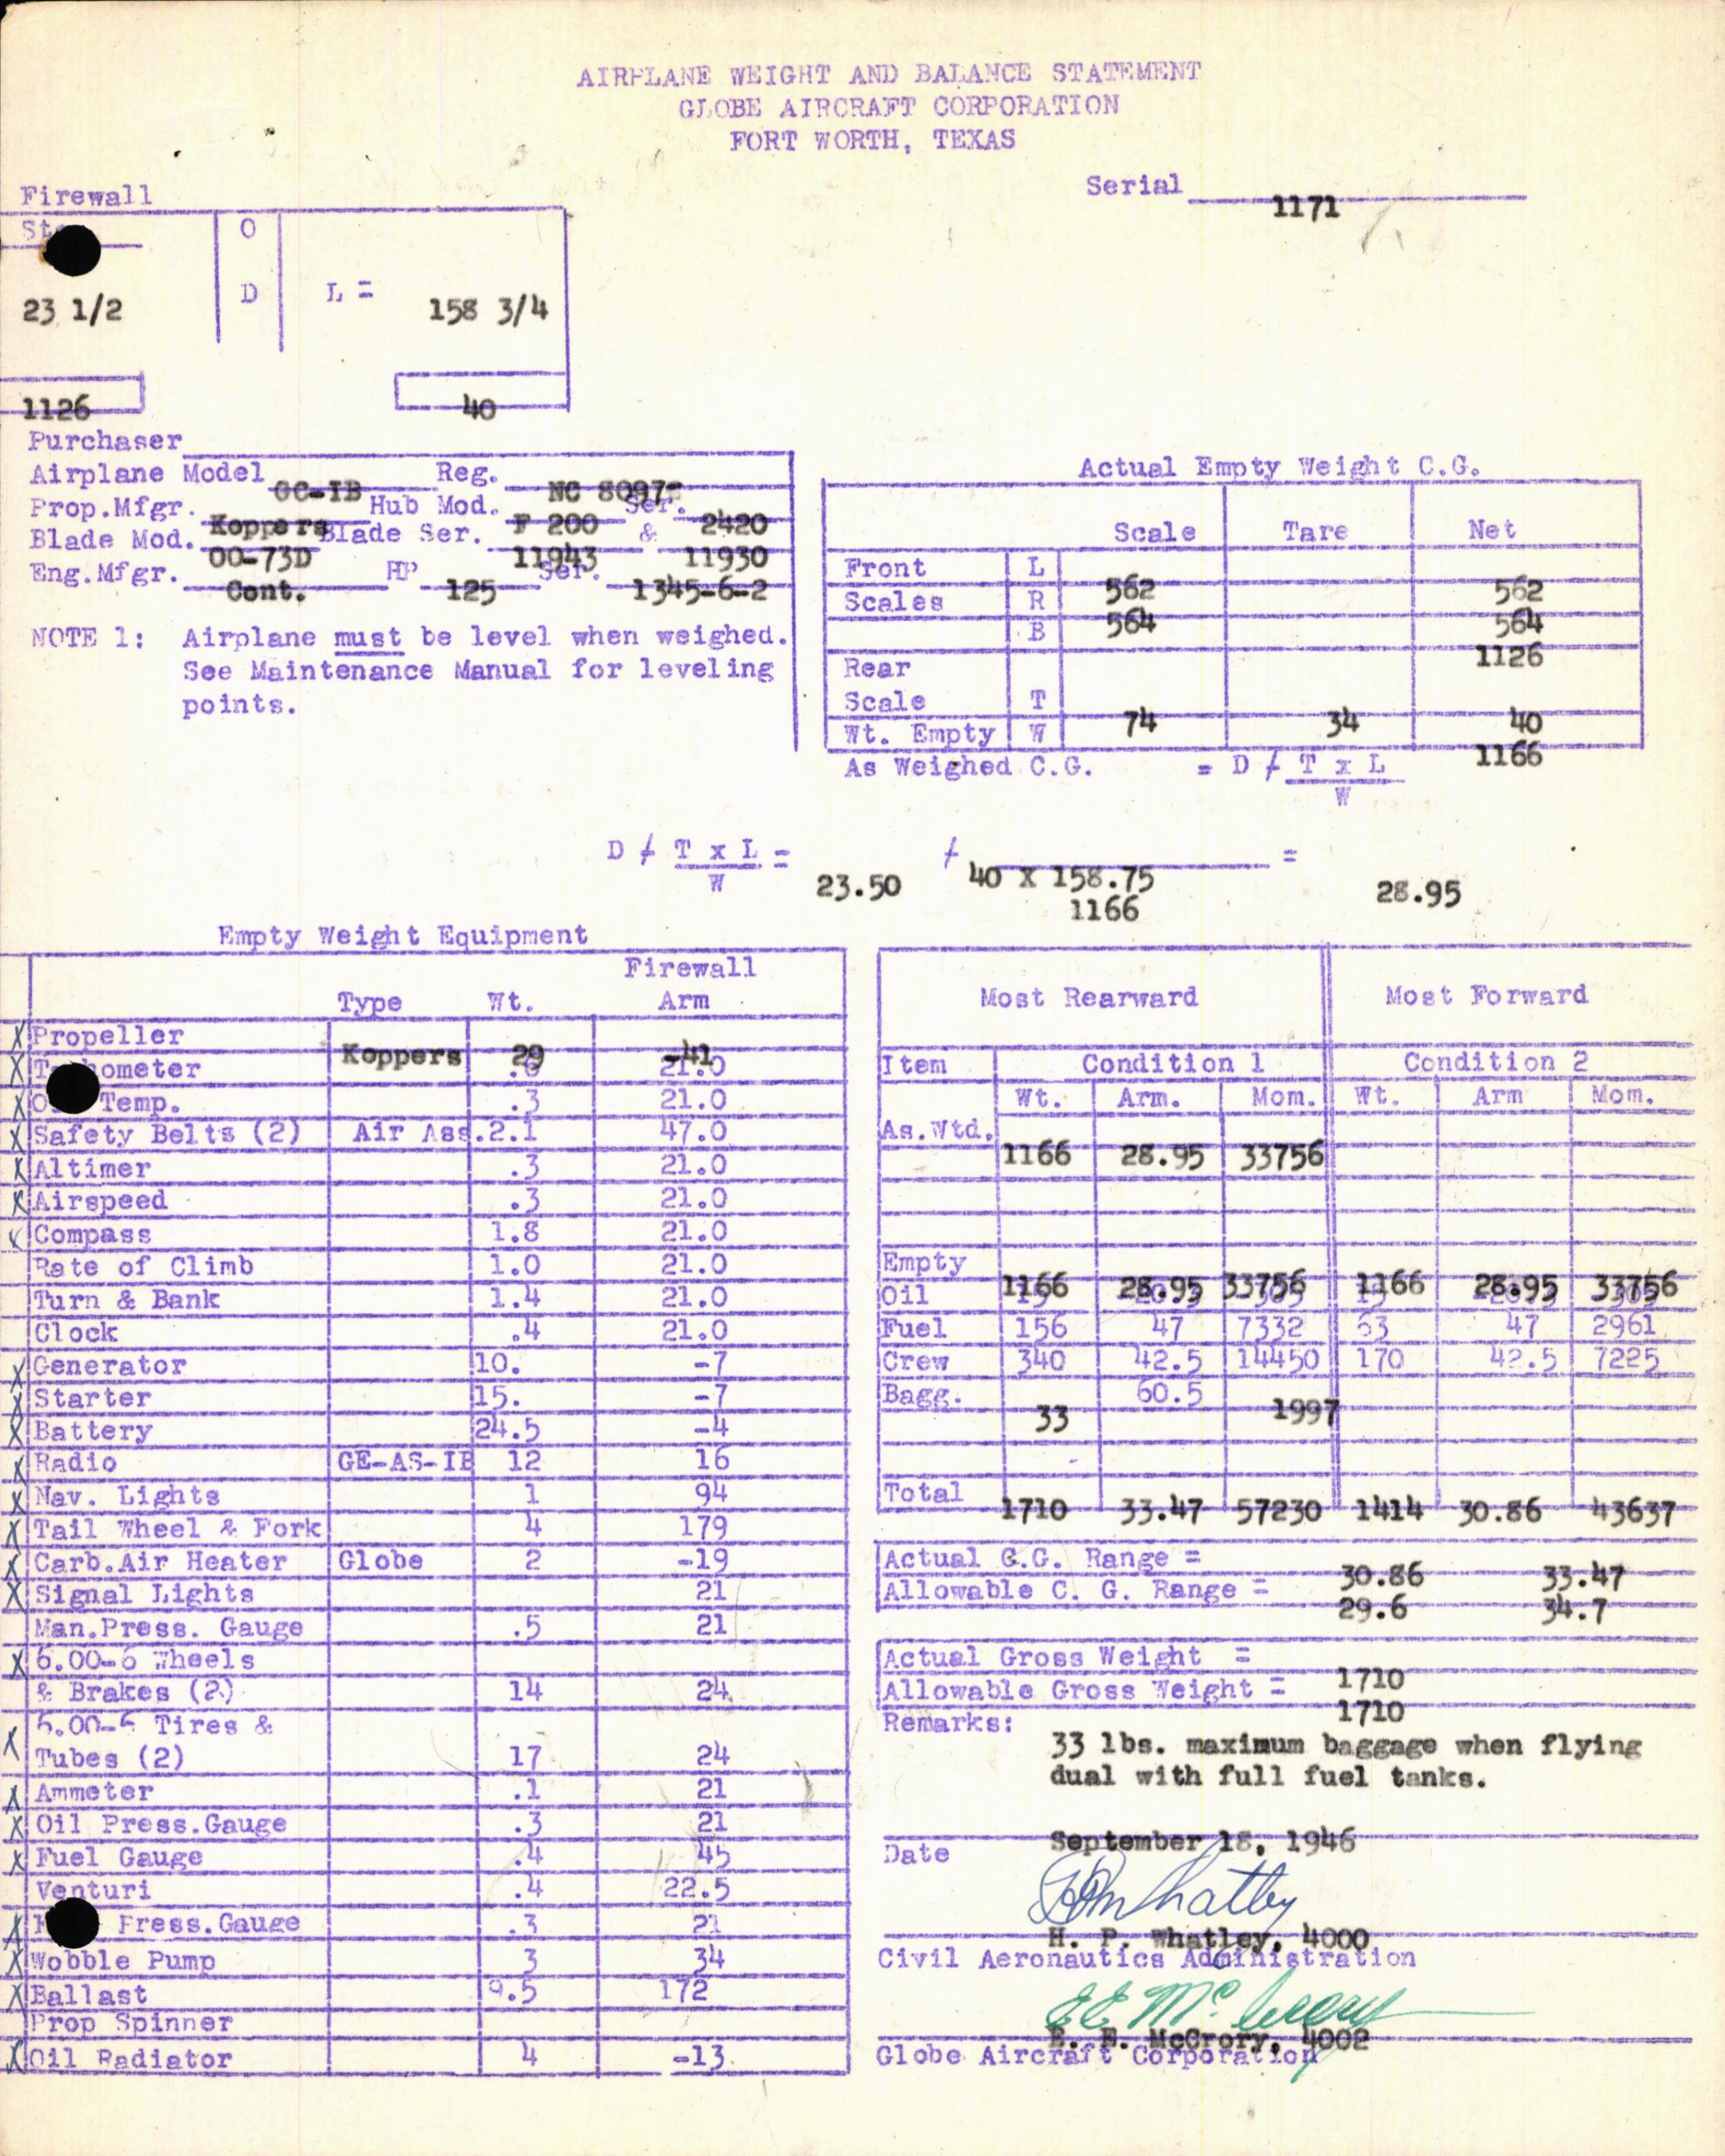 Sample page 5 from AirCorps Library document: Technical Information for Serial Number 1171